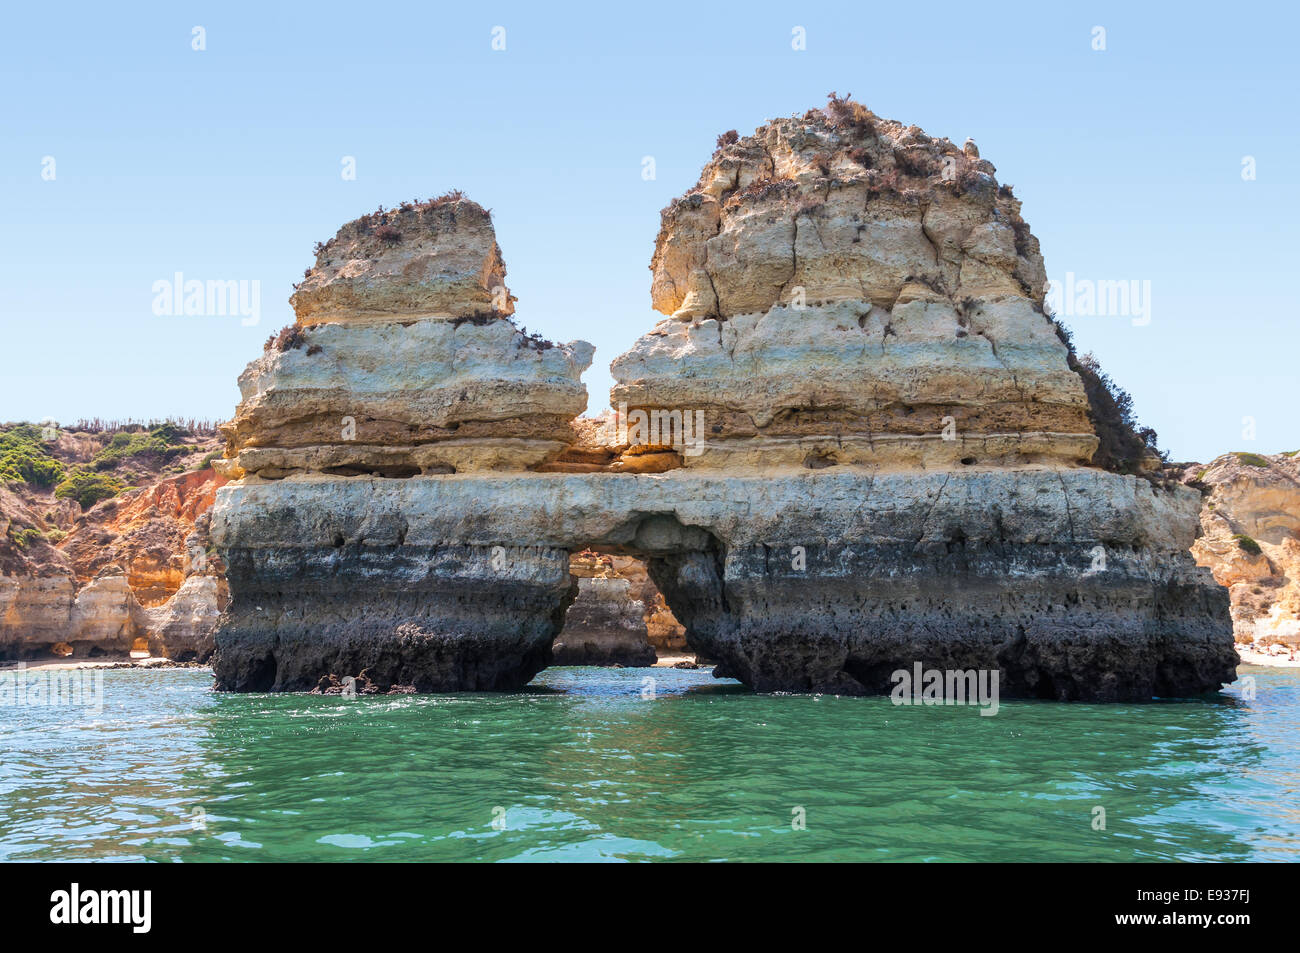 Rock formations near Lagos in Portugal seen from the water. Stock Photo